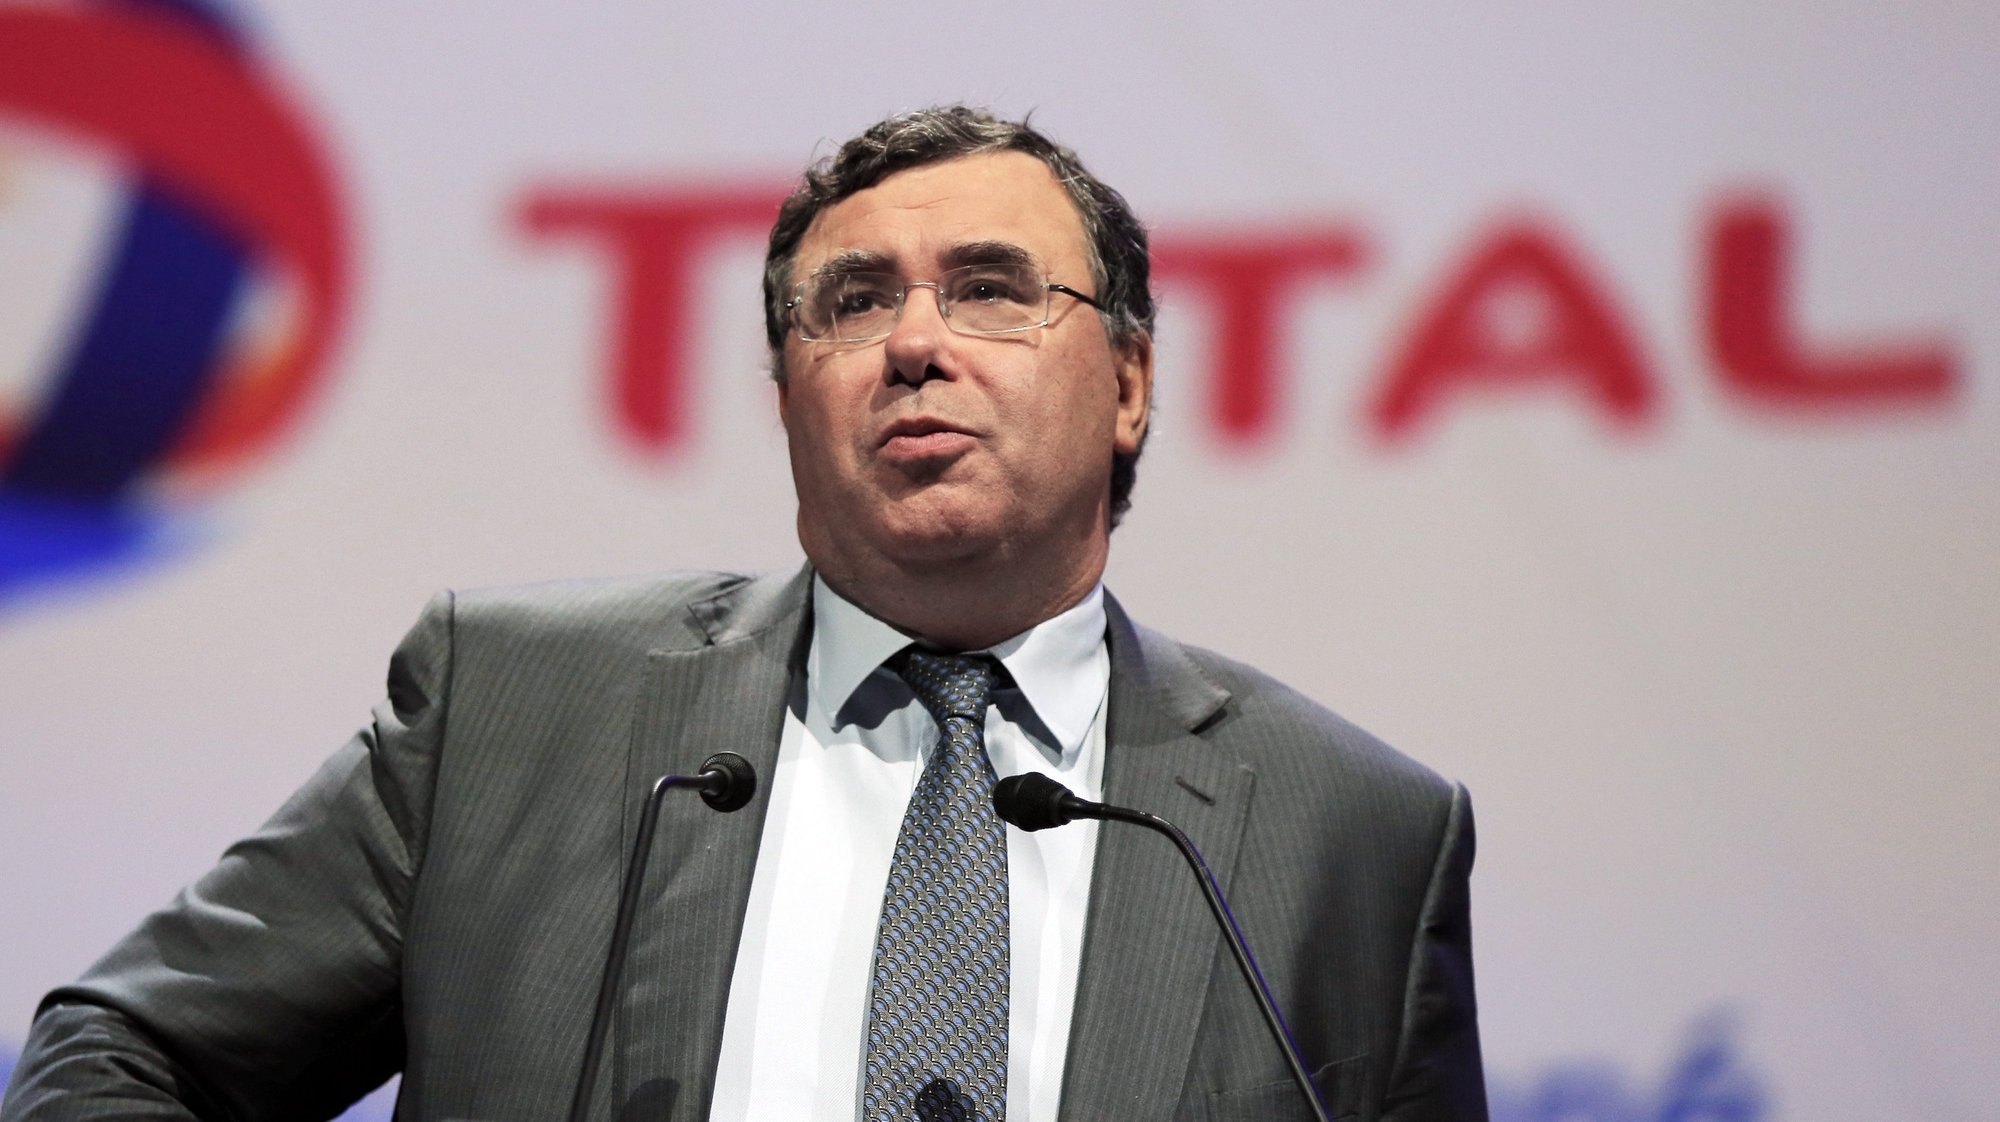 epa04779623 French energy group Total CEO Patrick Pouyanne delivers a speech during the opening ceremony of the 26th World Gas Conference (WGC) in Paris, France, 02 June 2015. The WGC runs from 01 to 05 June and gathers the world gas market leaders.  EPA/ETIENNE LAURENT